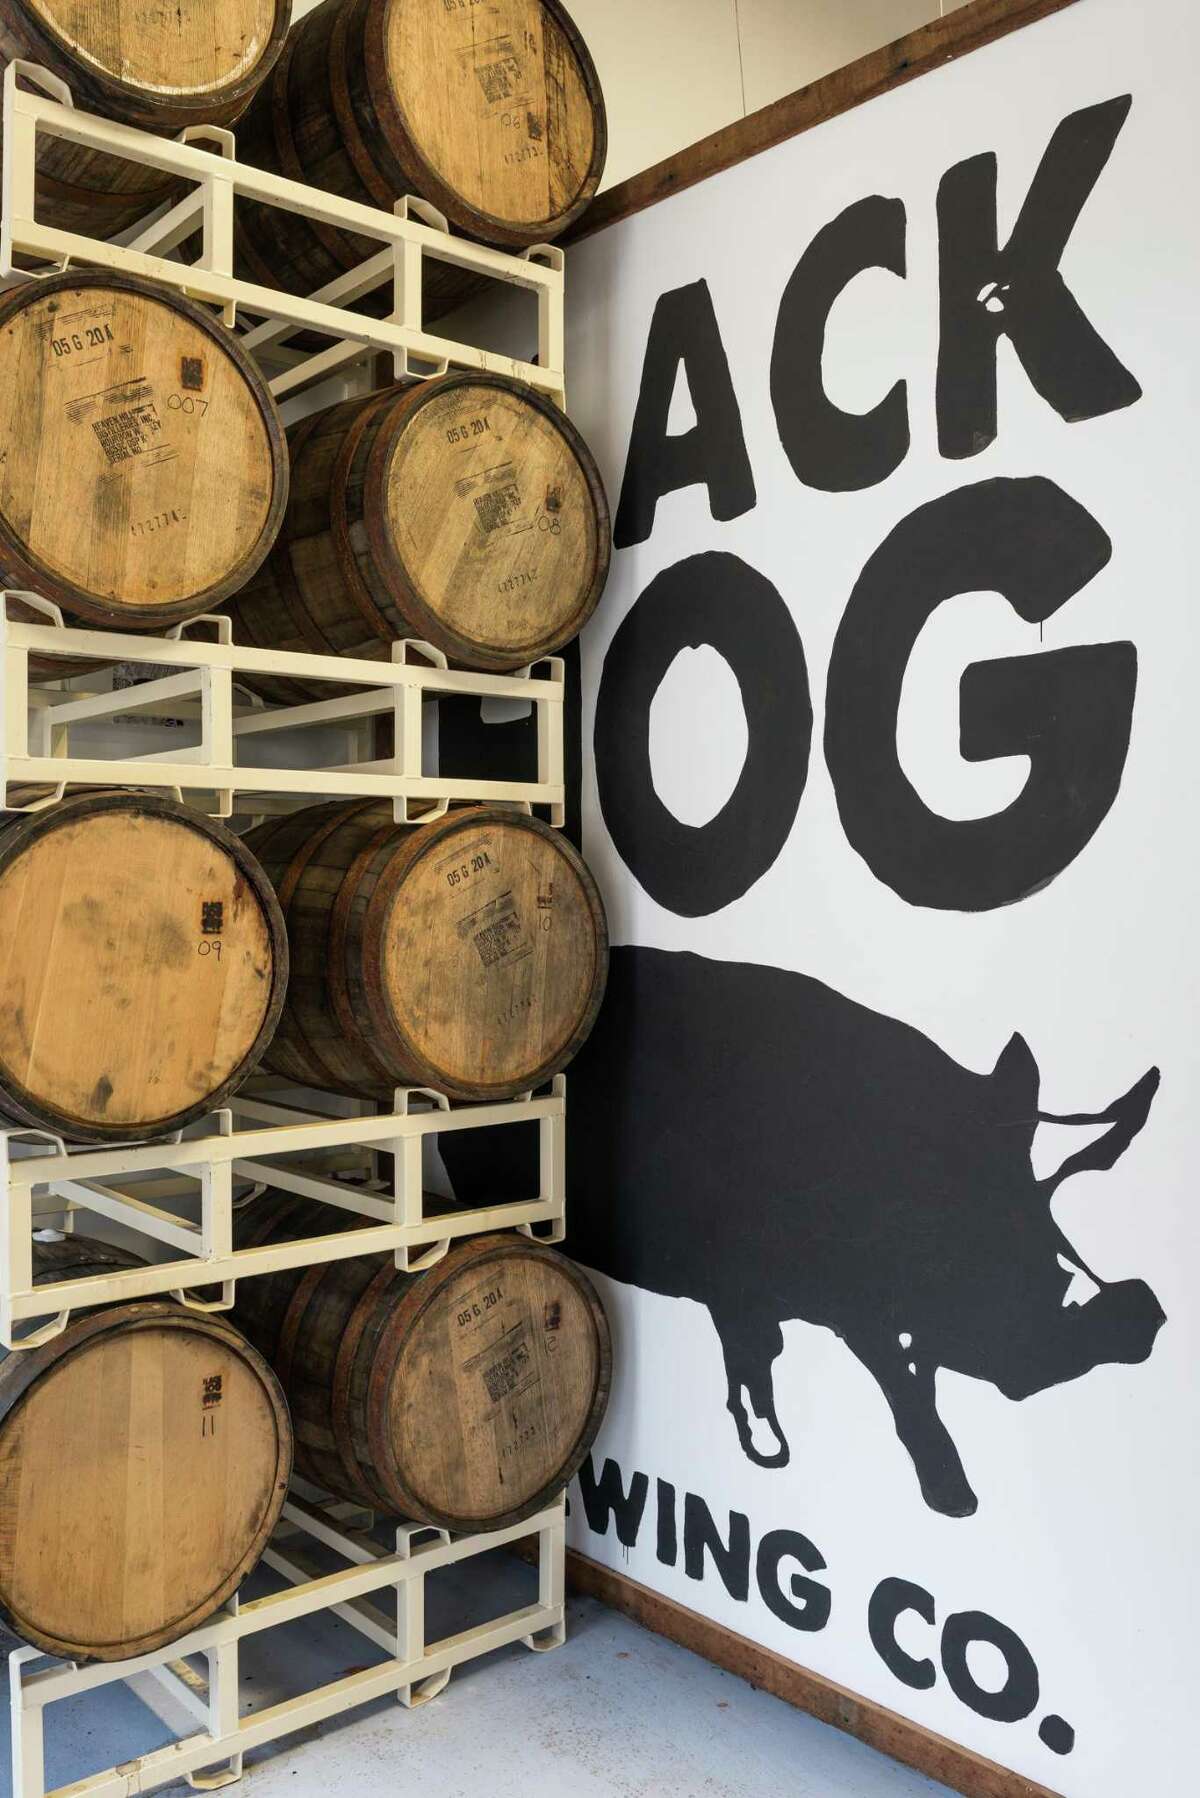 Black Hog Brewing Company will celebrate their 4th Annual Barrel Aged Brewfest in benefit of Vie for the Kids, on Saturday. Find out more.